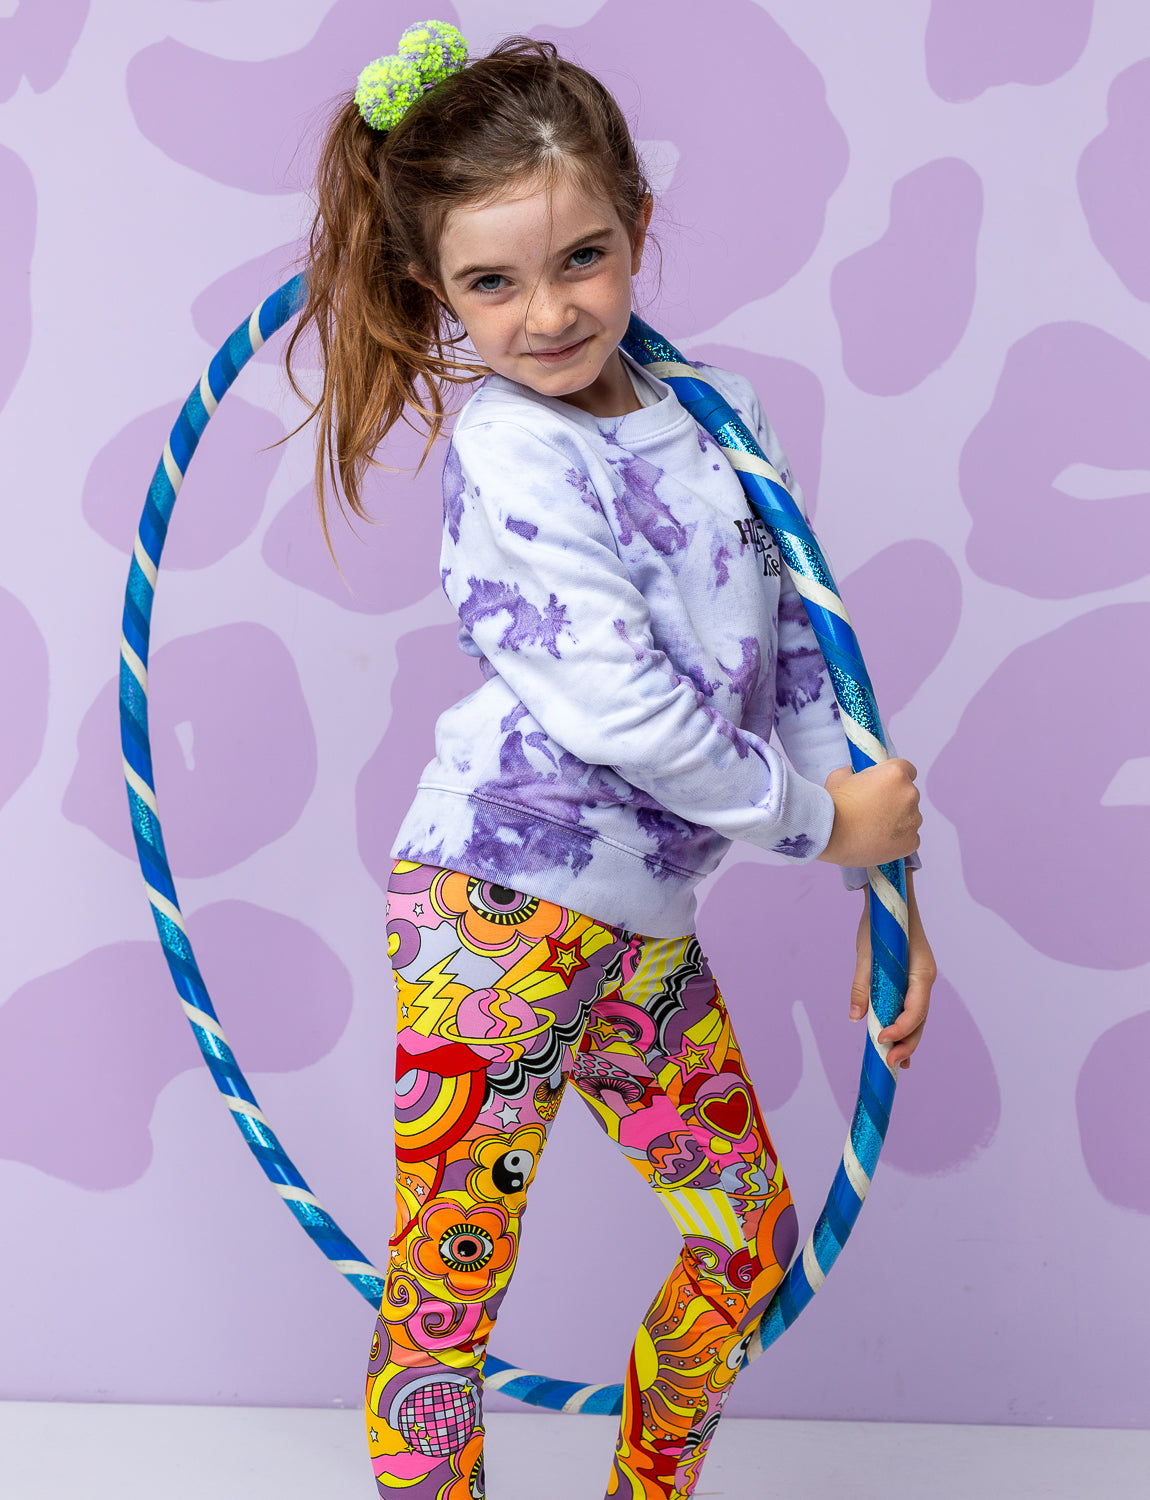 PaulieStrong Kid's Leggings - The Paulie Strong Foundation